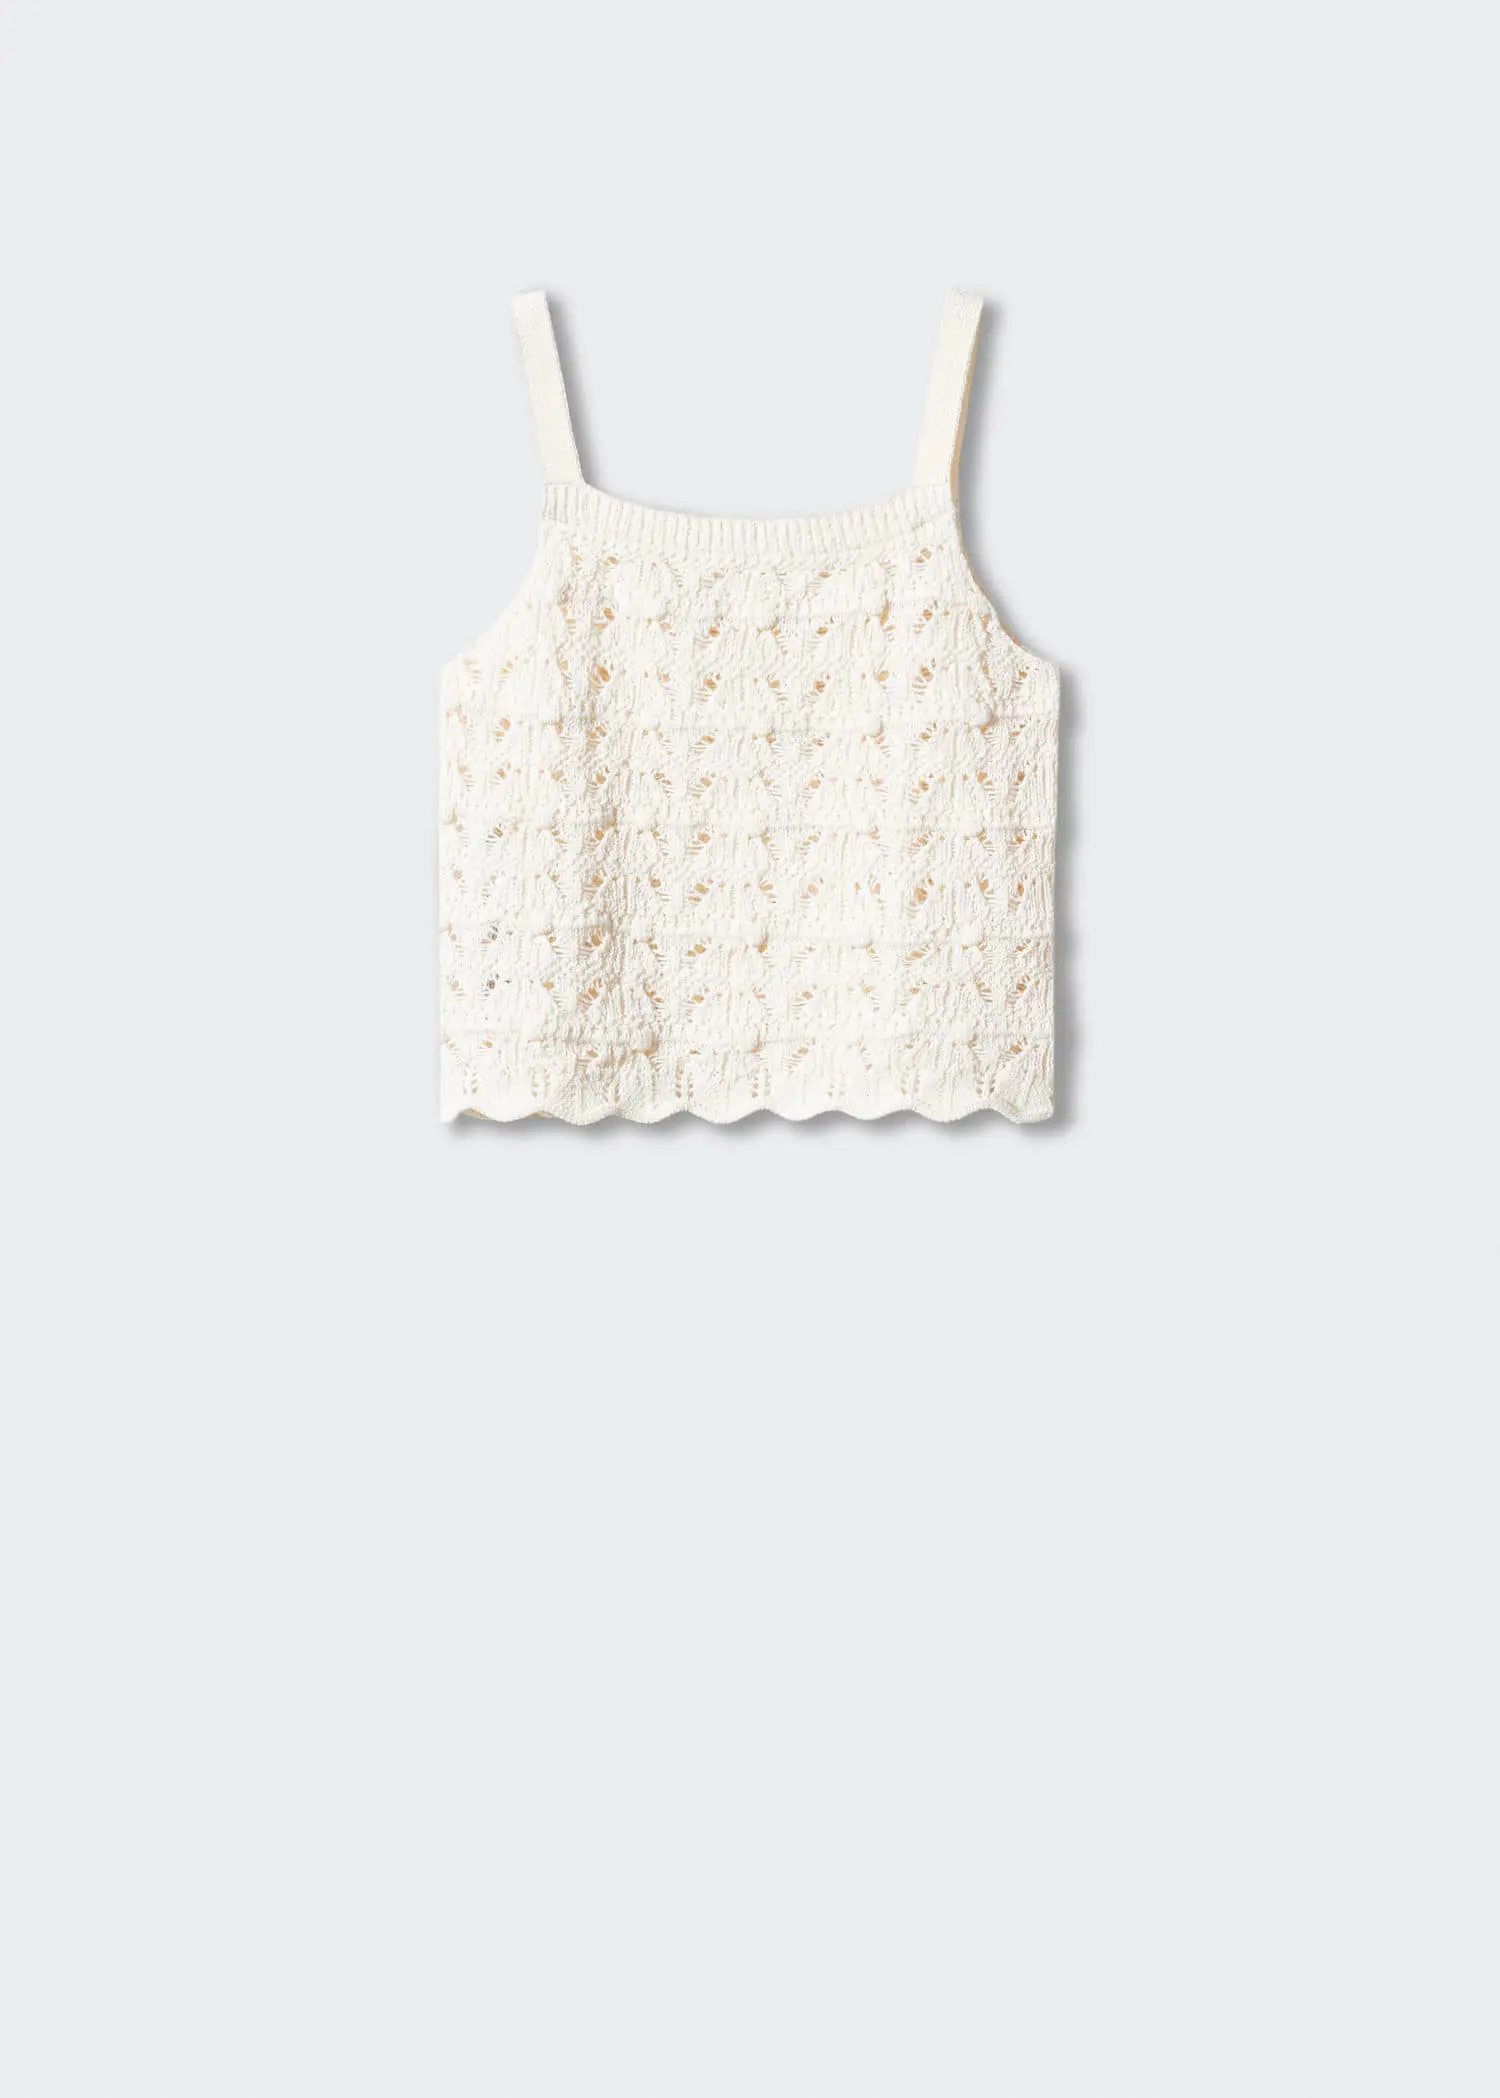 Mango Crochet top. a white tank top is shown on a white background. 